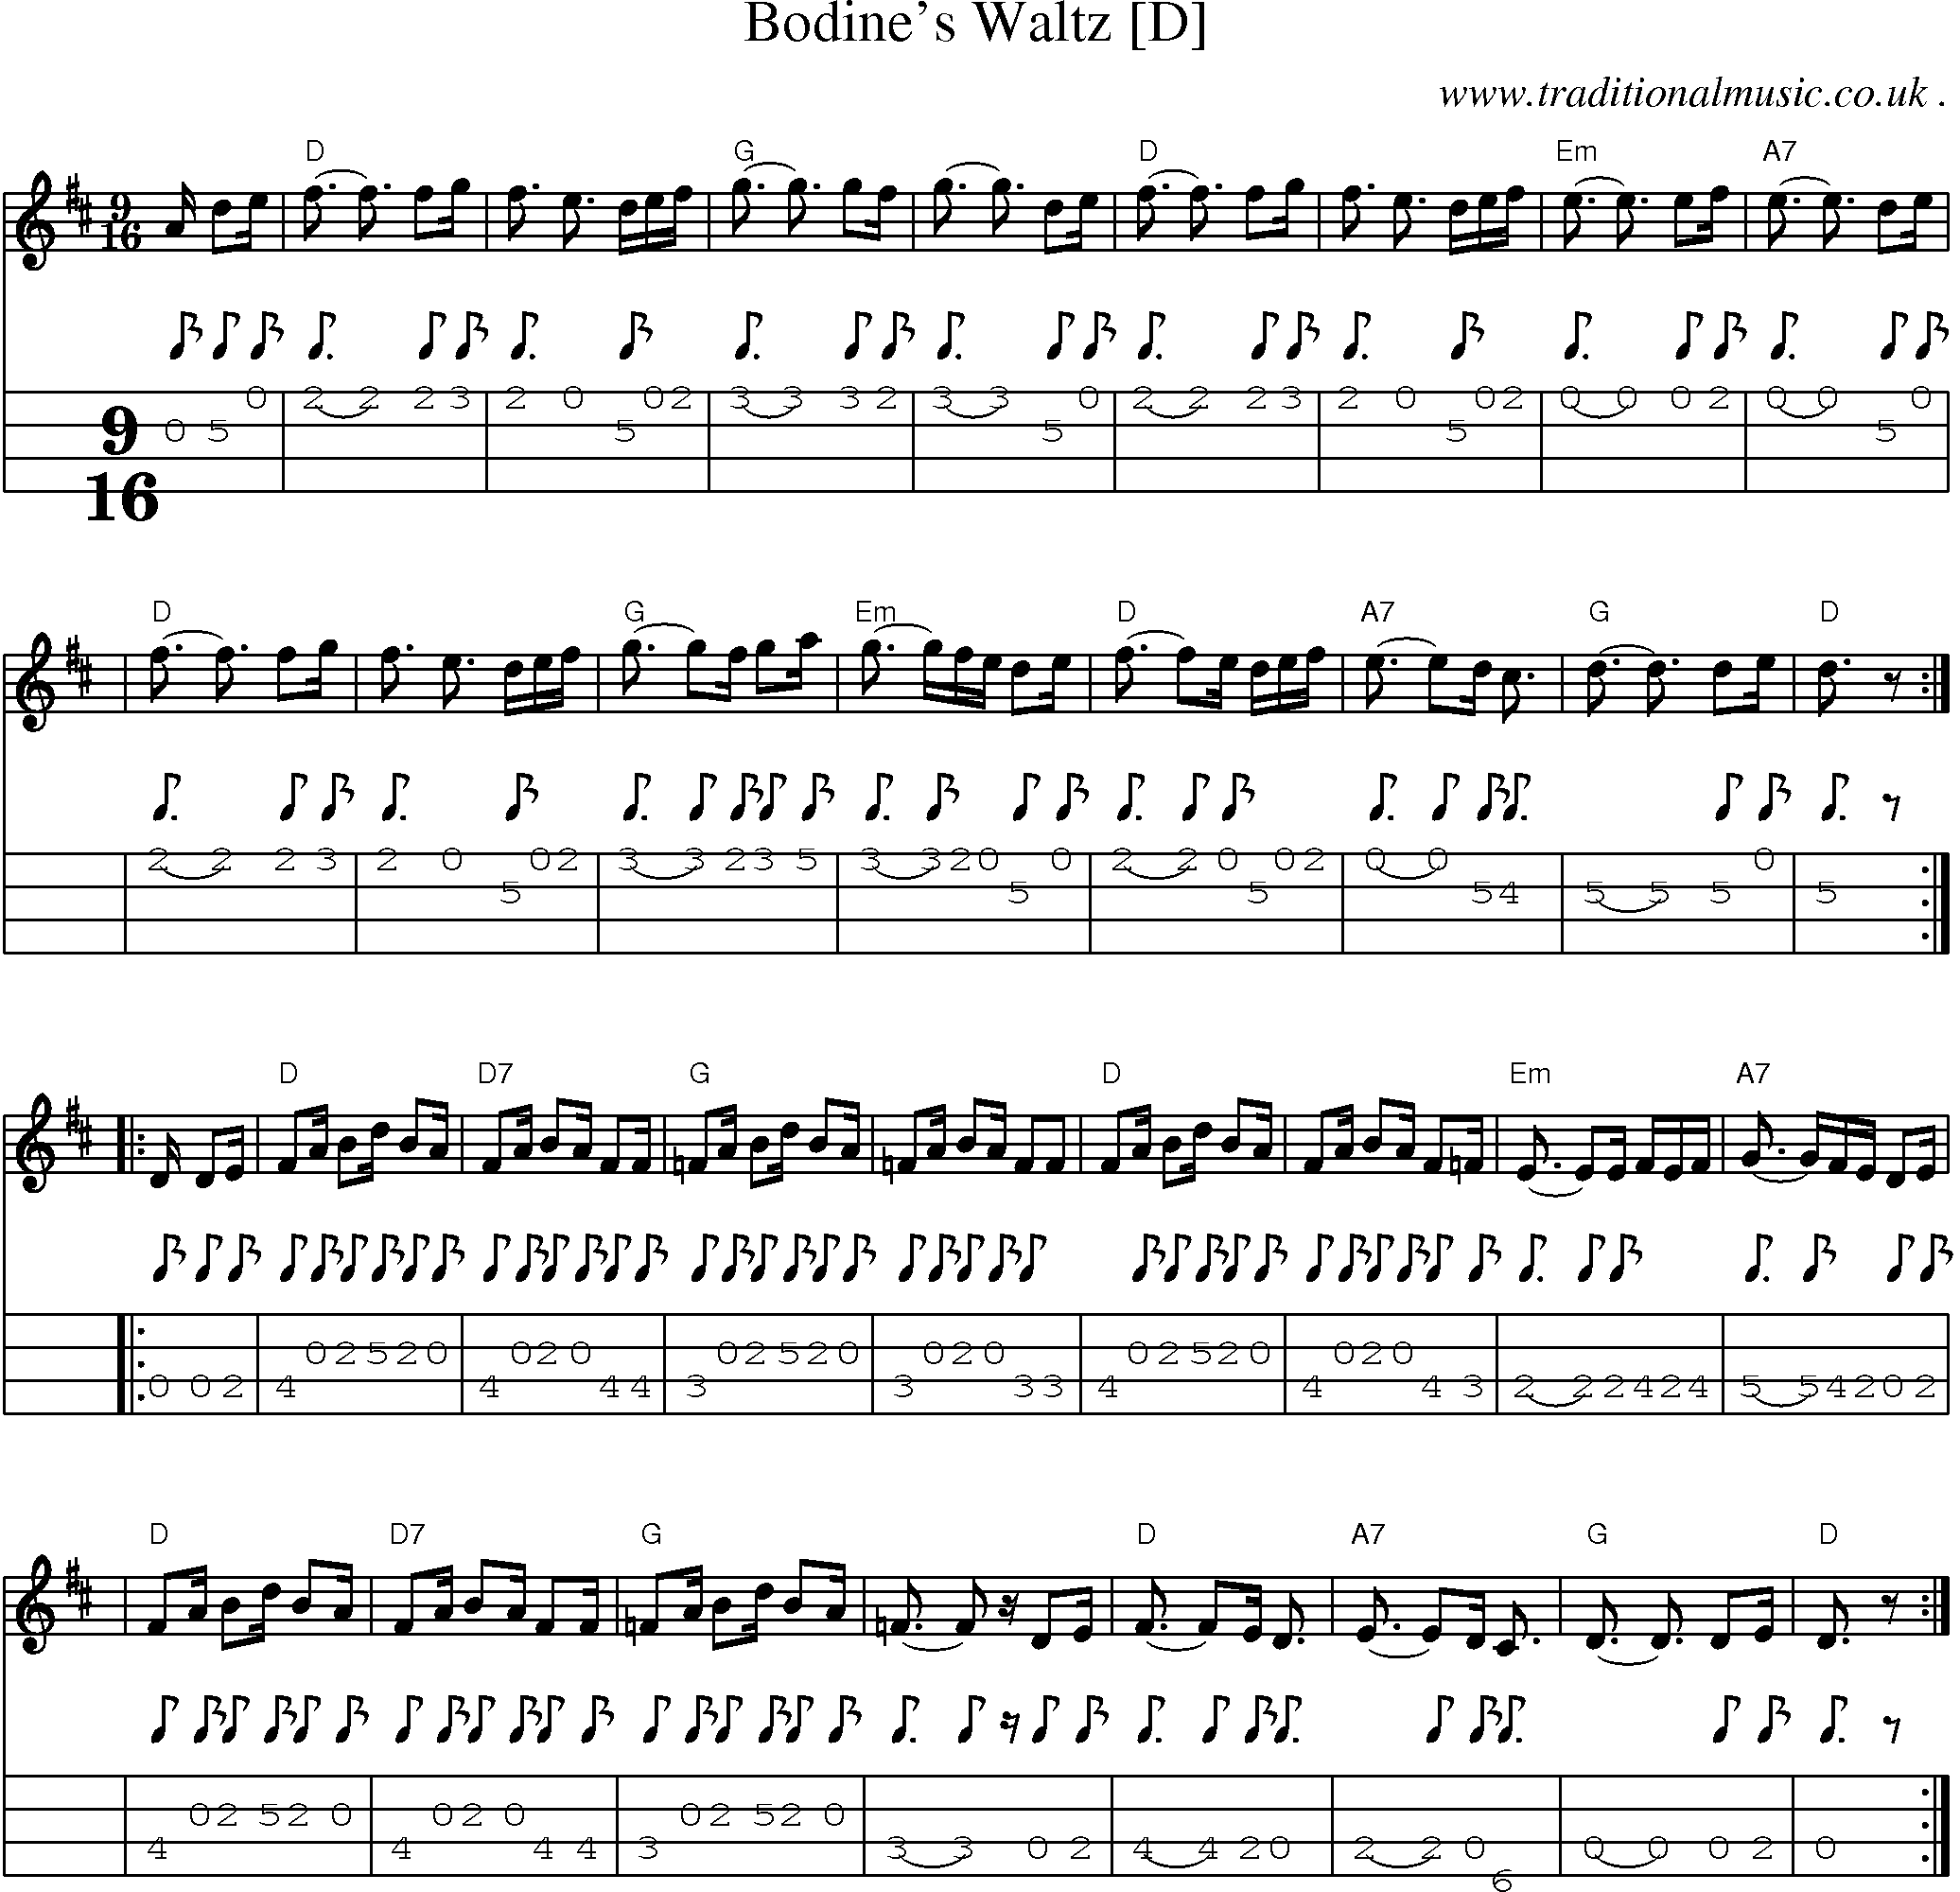 Music Score and Mandolin Tabs for Bodines Waltz [d]